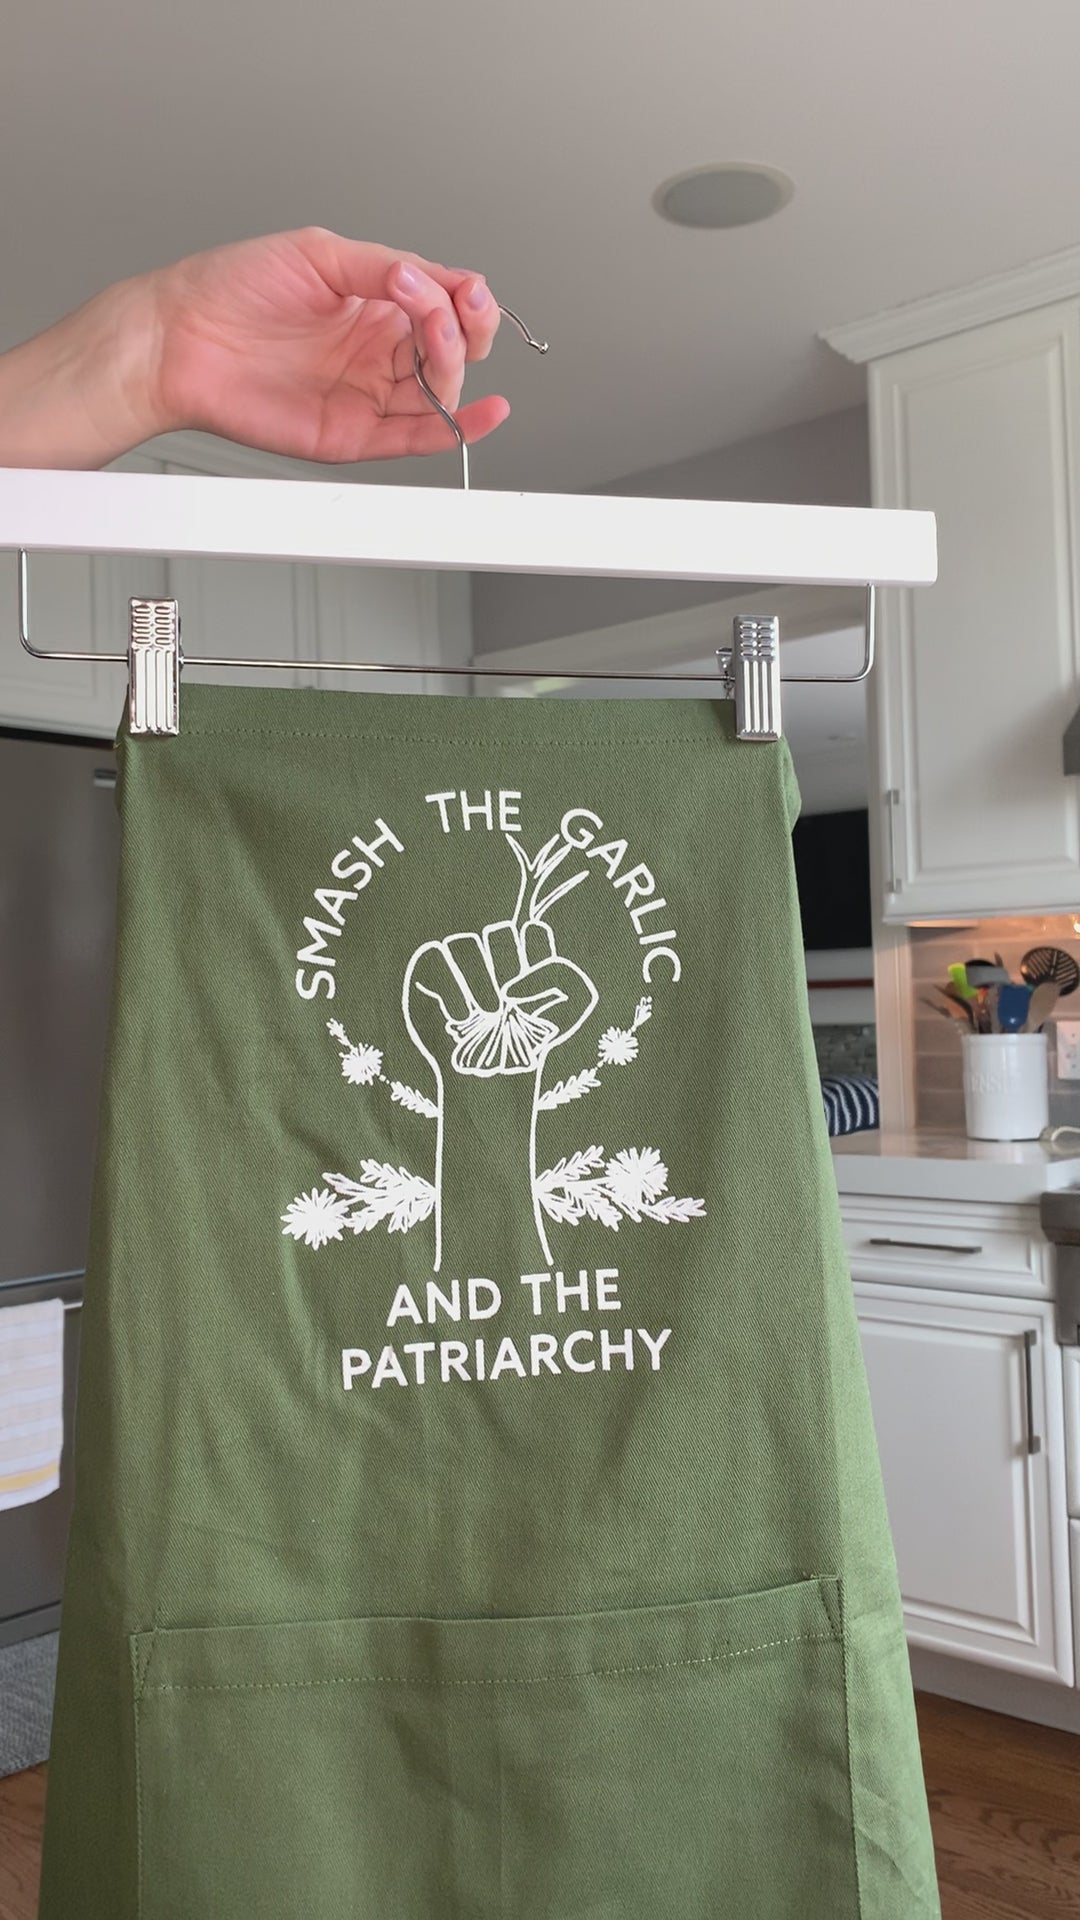 A green apron that reads "Smash the Garlic and the Patriarchy" in white letters hangs on a hanger